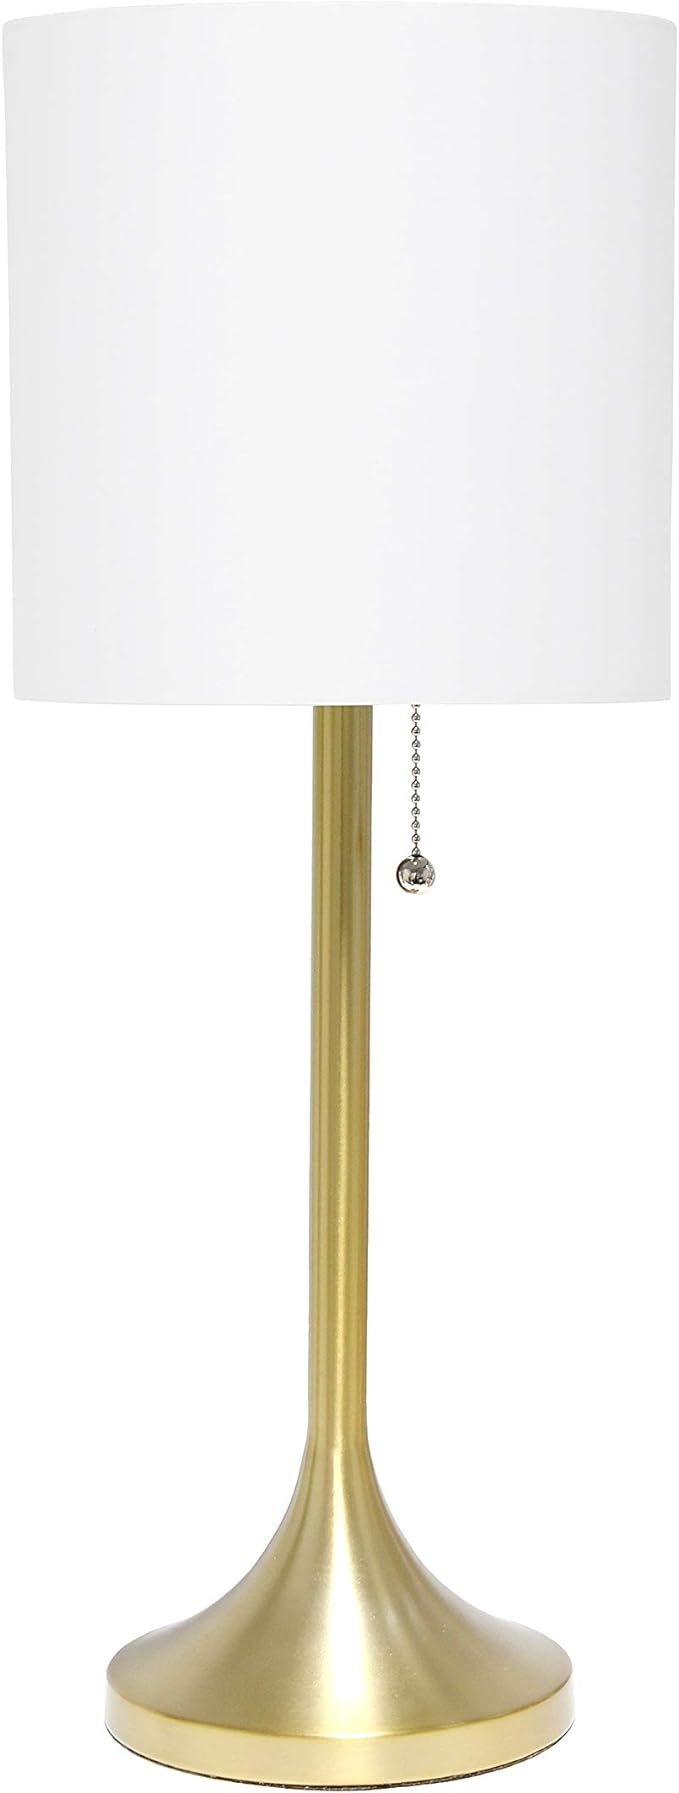 Simple Designs LT1076-GDW Tapered Fabric Drum Shade Table Lamp, Gold and White, 8 x 8 x 21 | Amazon (US)